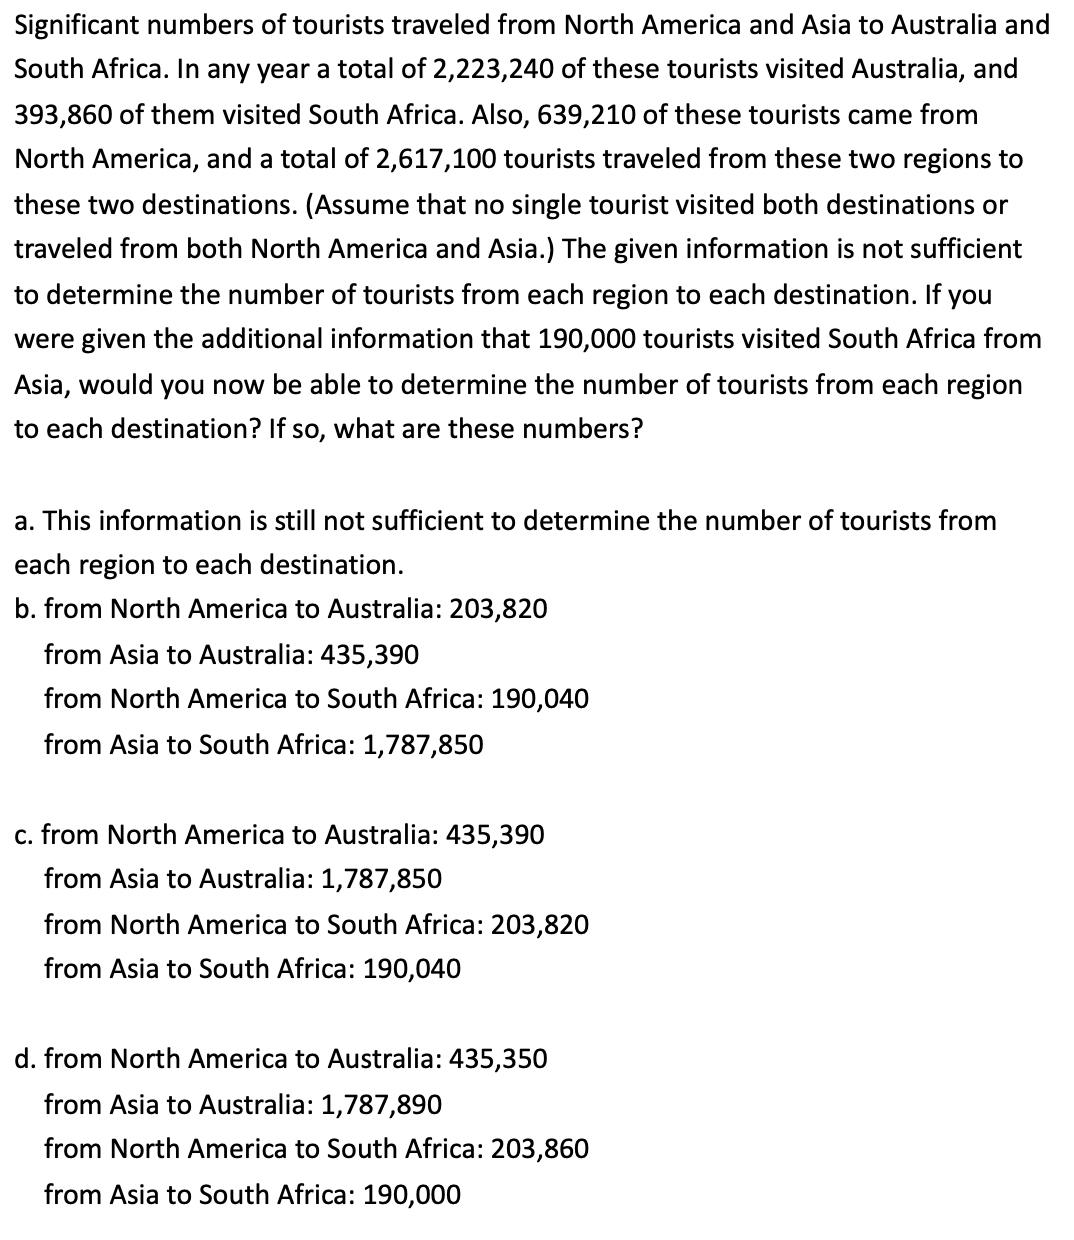 Significant numbers of tourists traveled from North America and Asia to Australia and
South Africa. In any year a total of 2,223,240 of these tourists visited Australia, and
393,860 of them visited South Africa. Also, 639,210 of these tourists came from
North America, and a total of 2,617,100 tourists traveled from these two regions to
these two destinations. (Assume that no single tourist visited both destinations or
traveled from both North America and Asia.) The given information is not sufficient
to determine the number of tourists from each region to each destination. If you
were given the additional information that 190,000 tourists visited South Africa from
Asia, would you now be able to determine the number of tourists from each region
to each destination? If so, what are these numbers?
a. This information is still not sufficient to determine the number of tourists from
each region to each destination.
b. from North America to Australia: 203,820
from Asia to Australia: 435,390
from North America to South Africa: 190,040
from Asia to South Africa: 1,787,850
c. from North America to Australia: 435,390
from Asia to Australia: 1,787,850
from North America to South Africa: 203,820
from Asia to South Africa: 190,040
d. from North America to Australia: 435,350
from Asia to Australia: 1,787,890
from North America to South Africa: 203,860
from Asia to South Africa: 190,000
